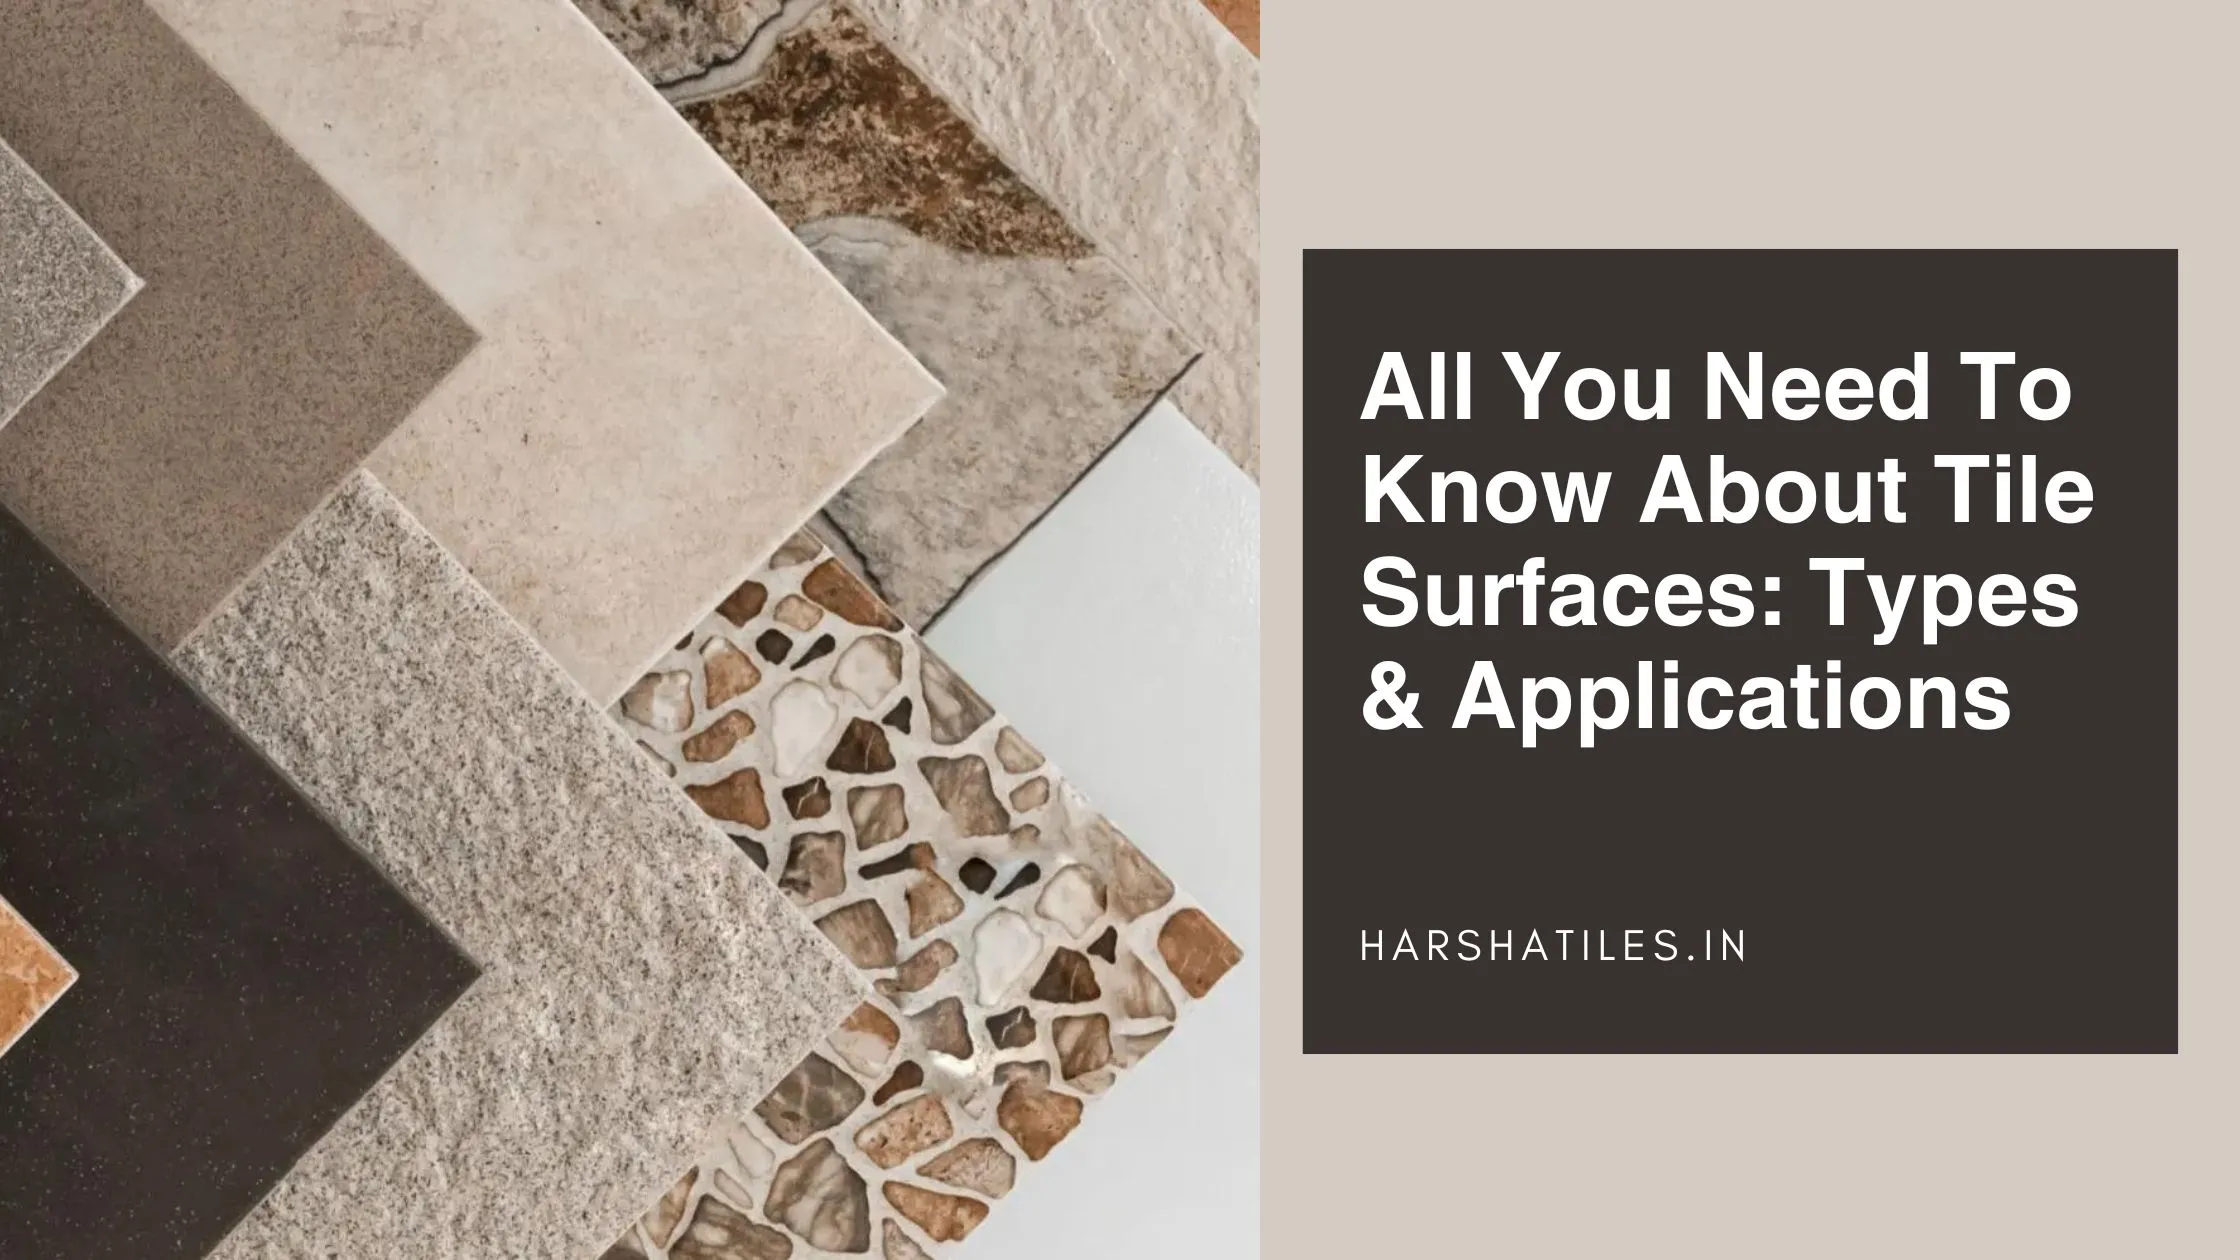 All You Need To Know About Tile Surfaces: Types & Applications